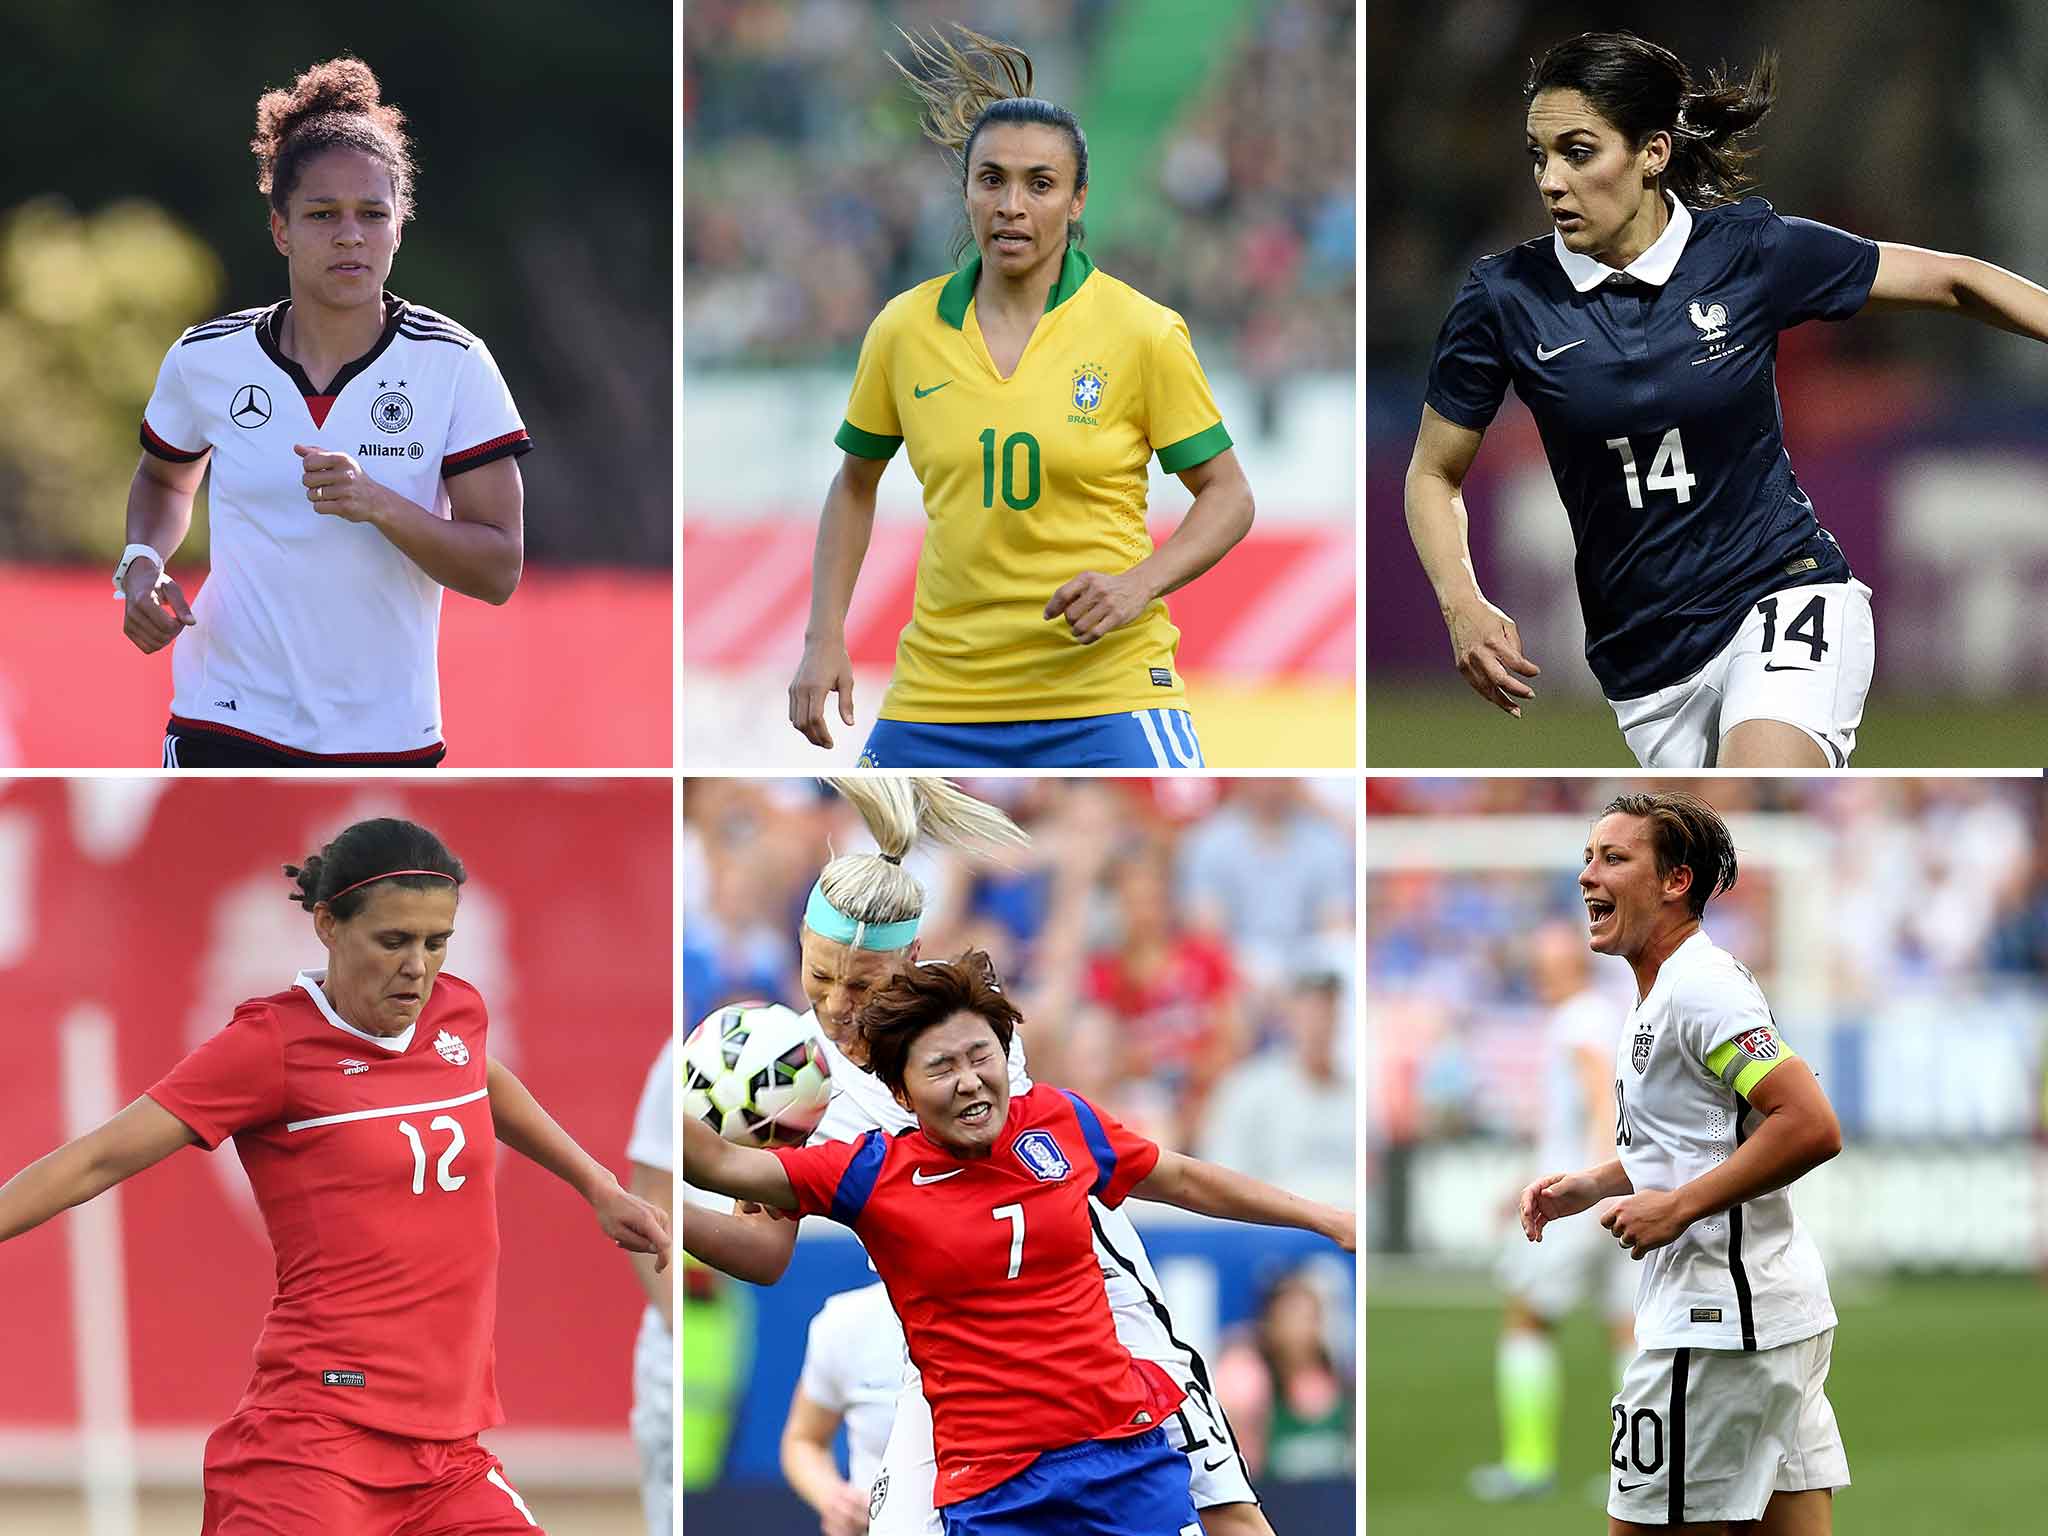 Six player to watch at the Women's World Cup